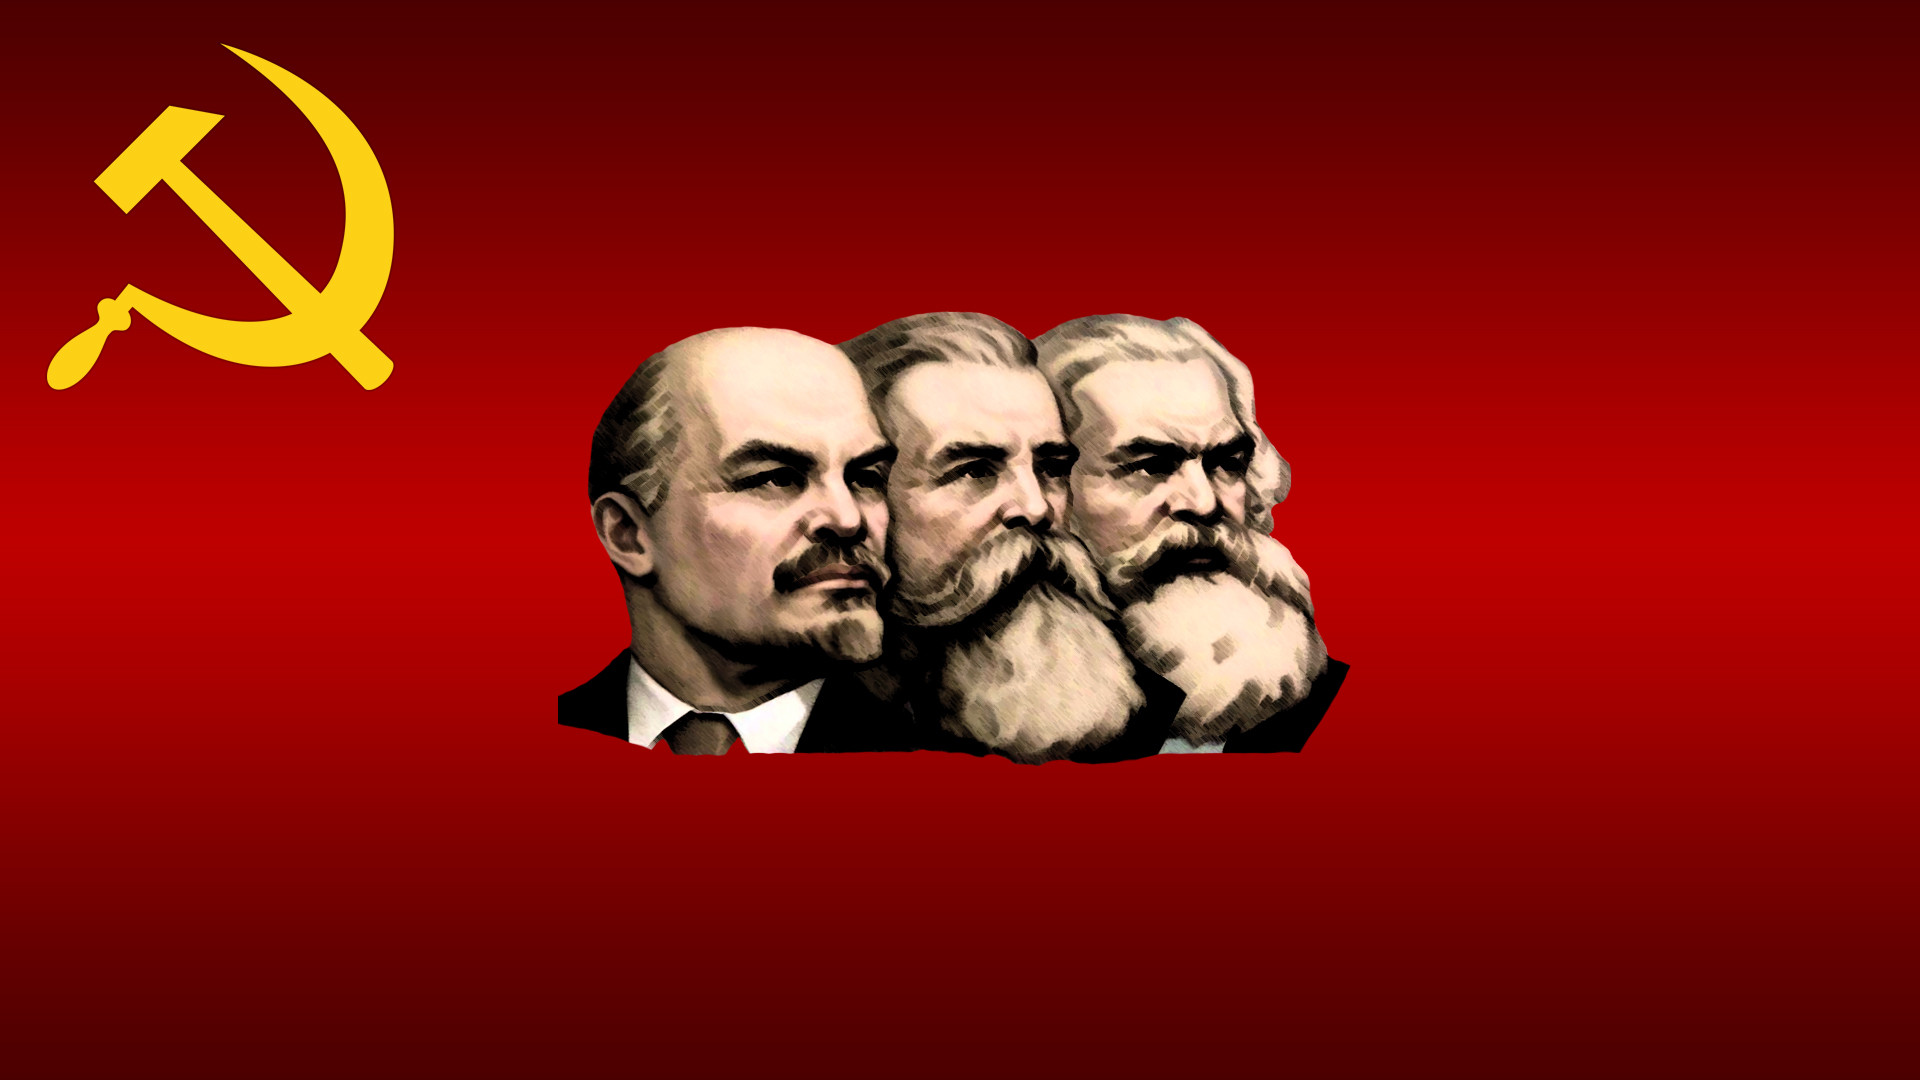 1920x1080 Fathers of Communism - Wallpaper [] Need #iPhone #6S #Plus # Wallpaper/ #Background for #IPhone6SPlus? Follow iPhone 6S Plus  3Wallpapers/ #…